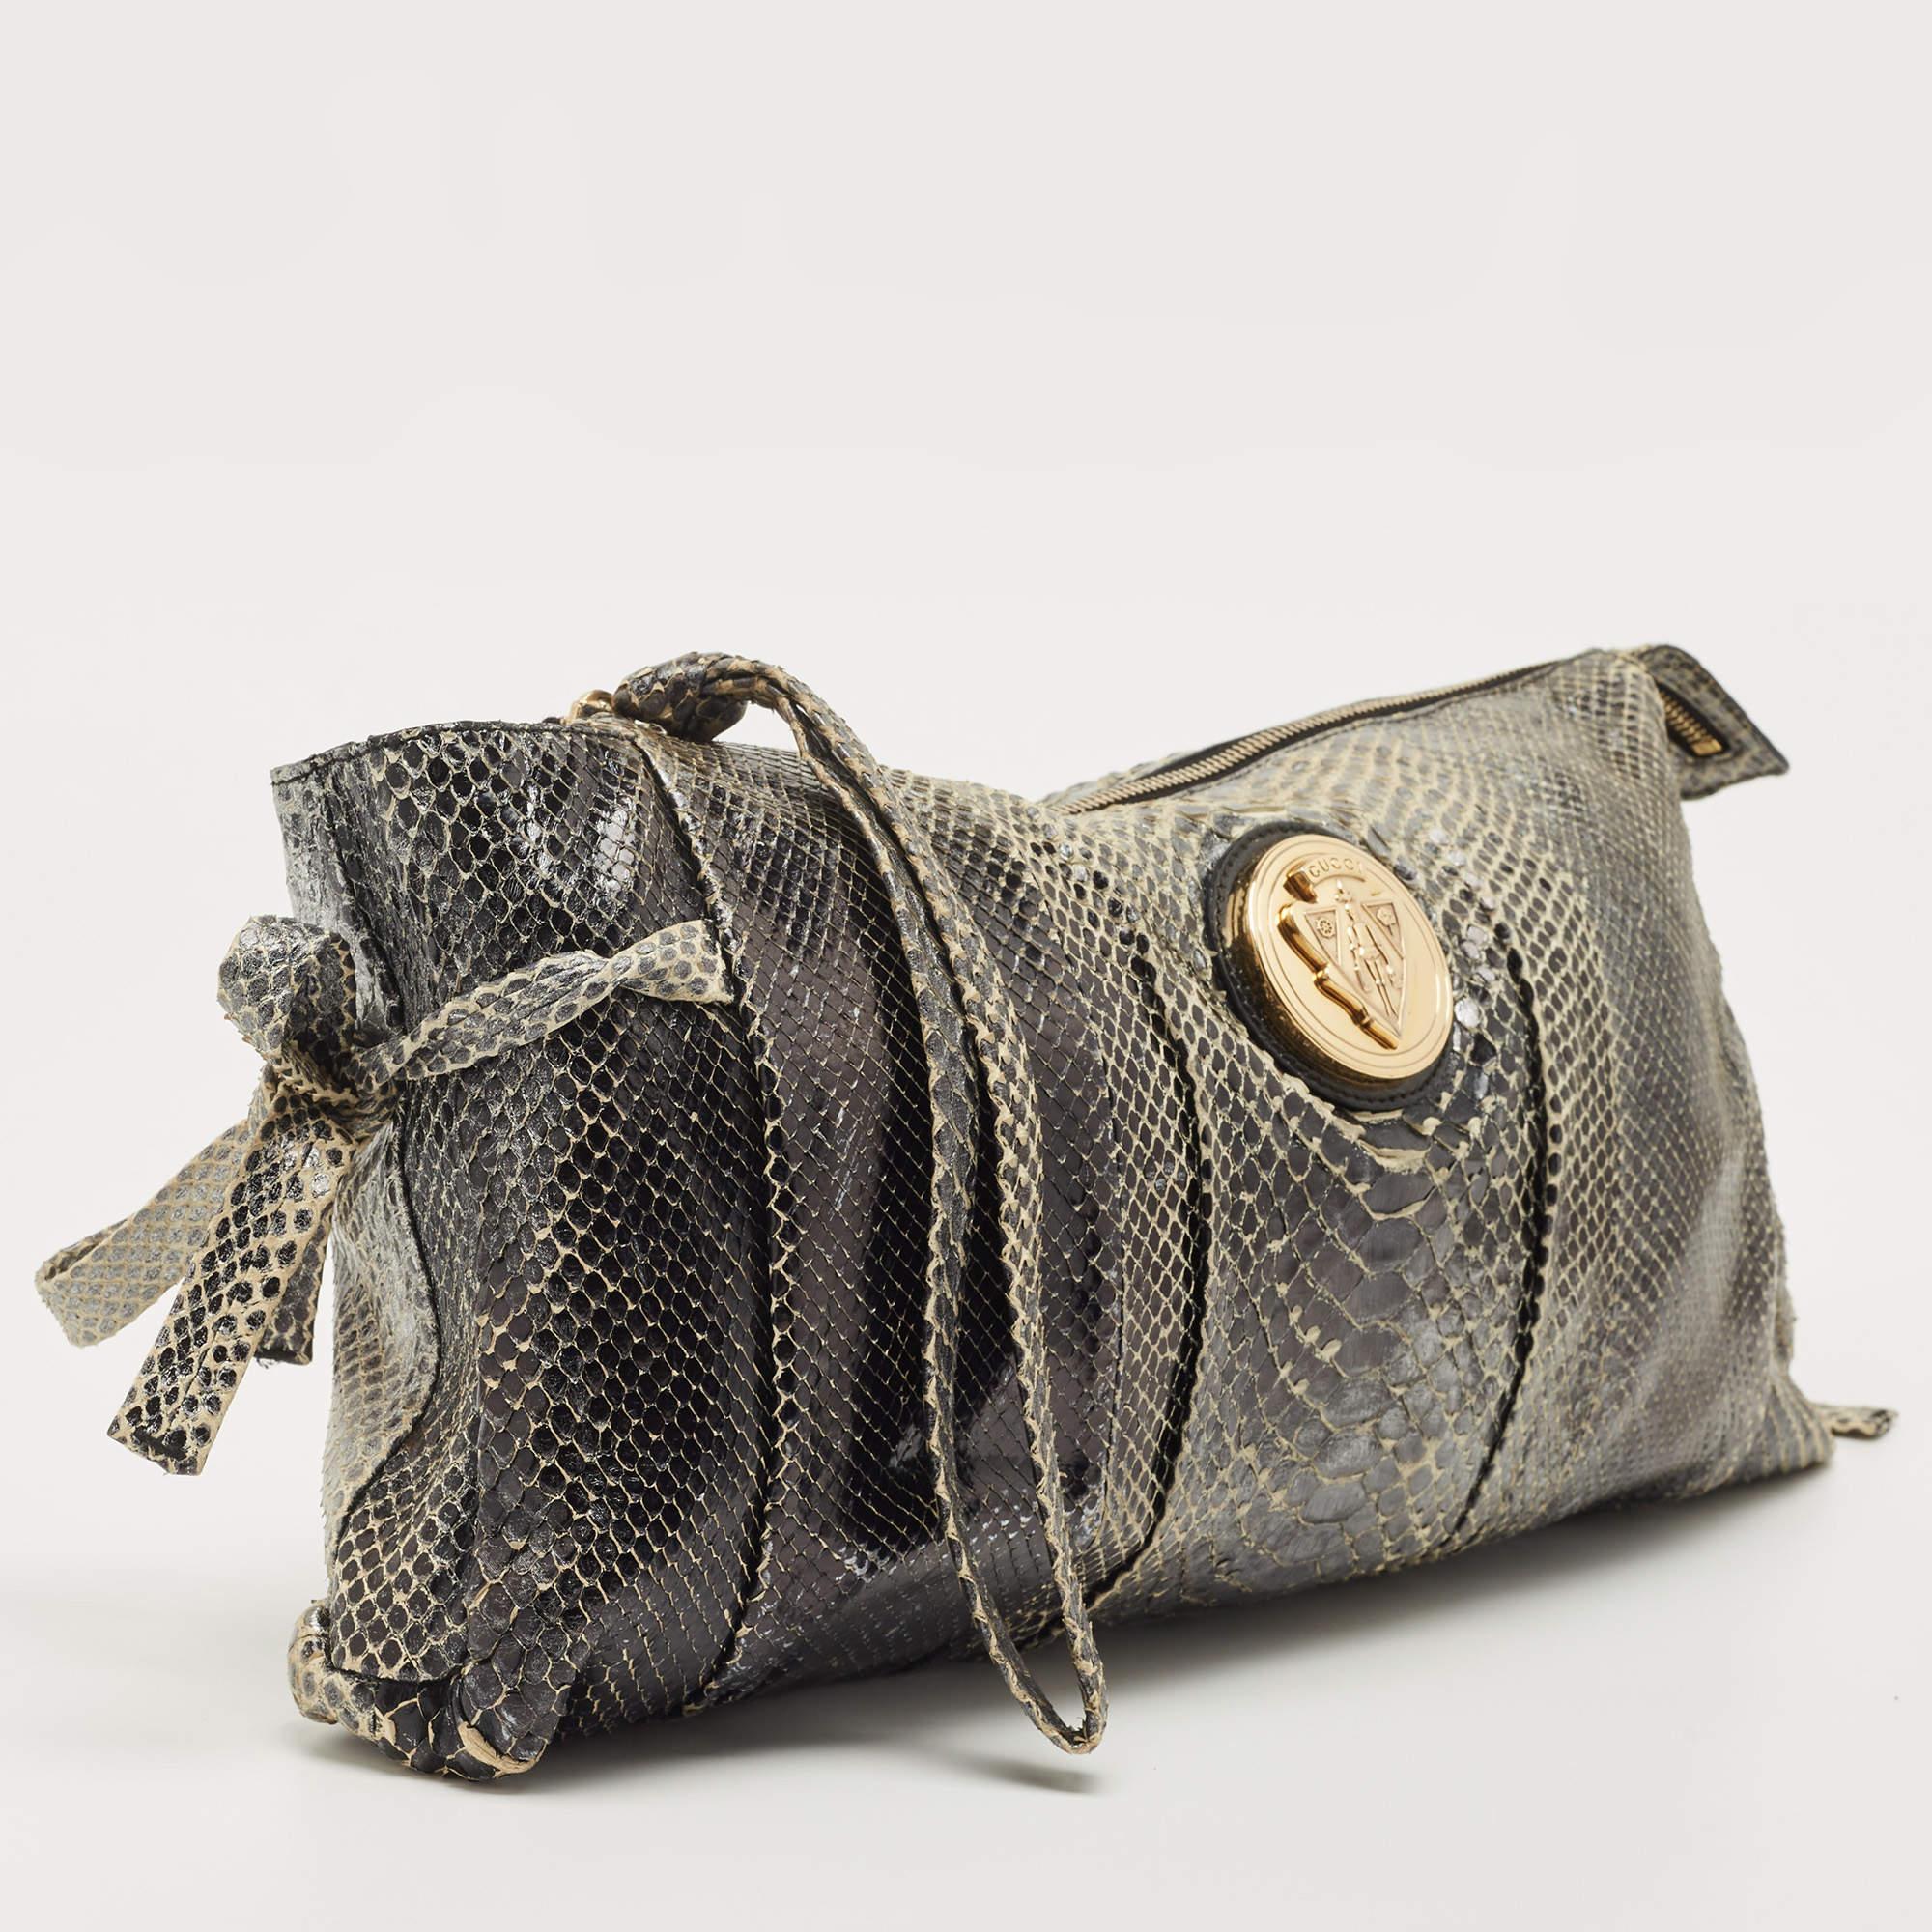 This Gucci clutch is built to suit your stylish ensembles. Crafted from python skin, it has ties on the sides and a zipper which secures a nylon interior. It is complete with the signature Hysteria emblem on the front and a wristlet.

